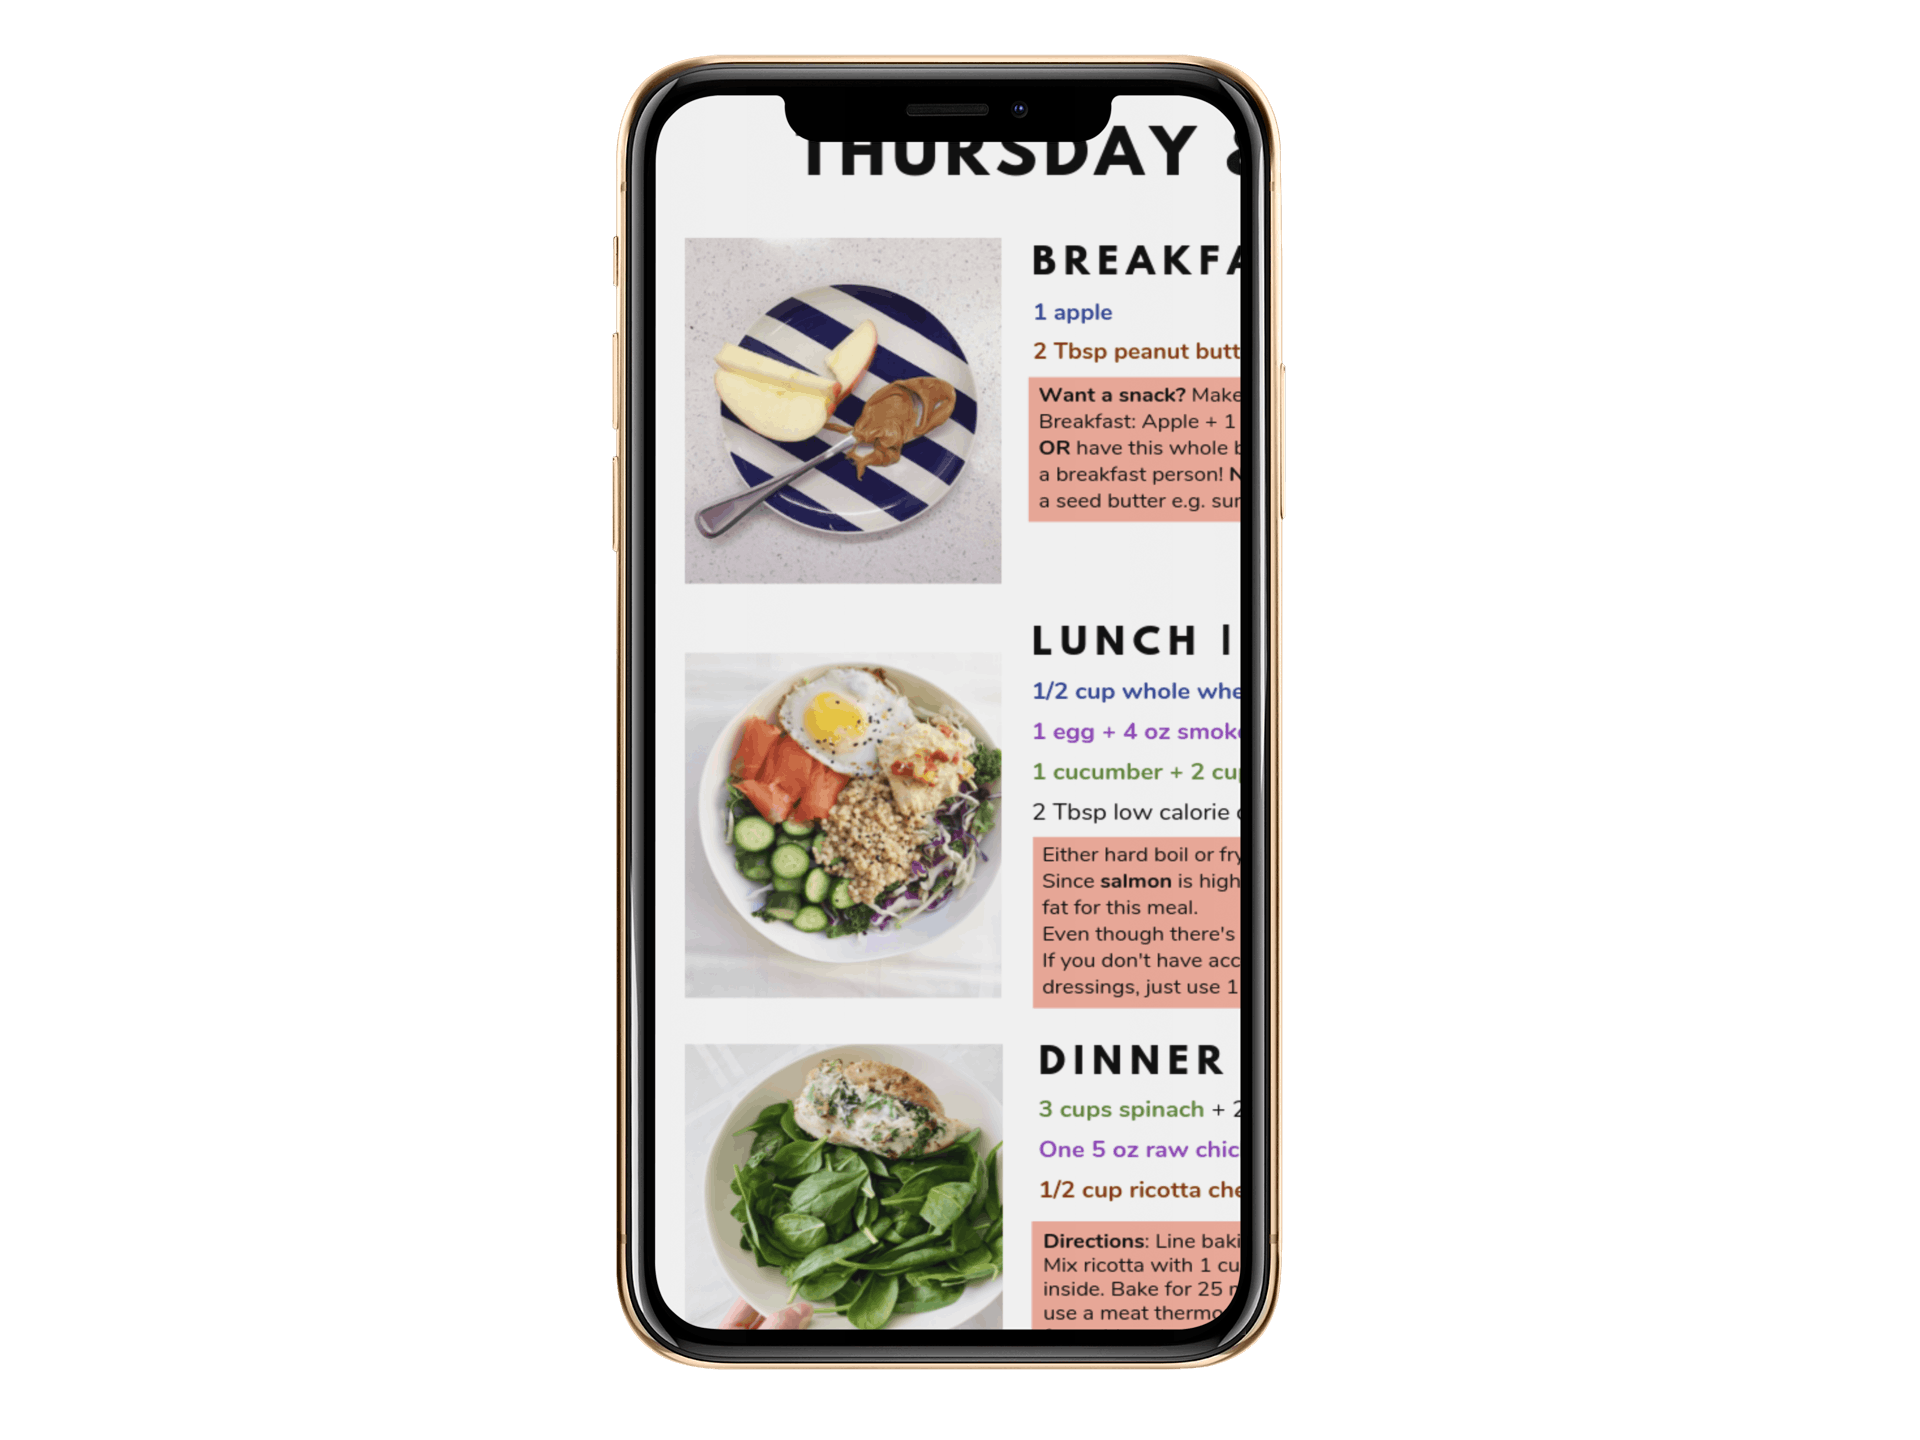 New Meals This Week